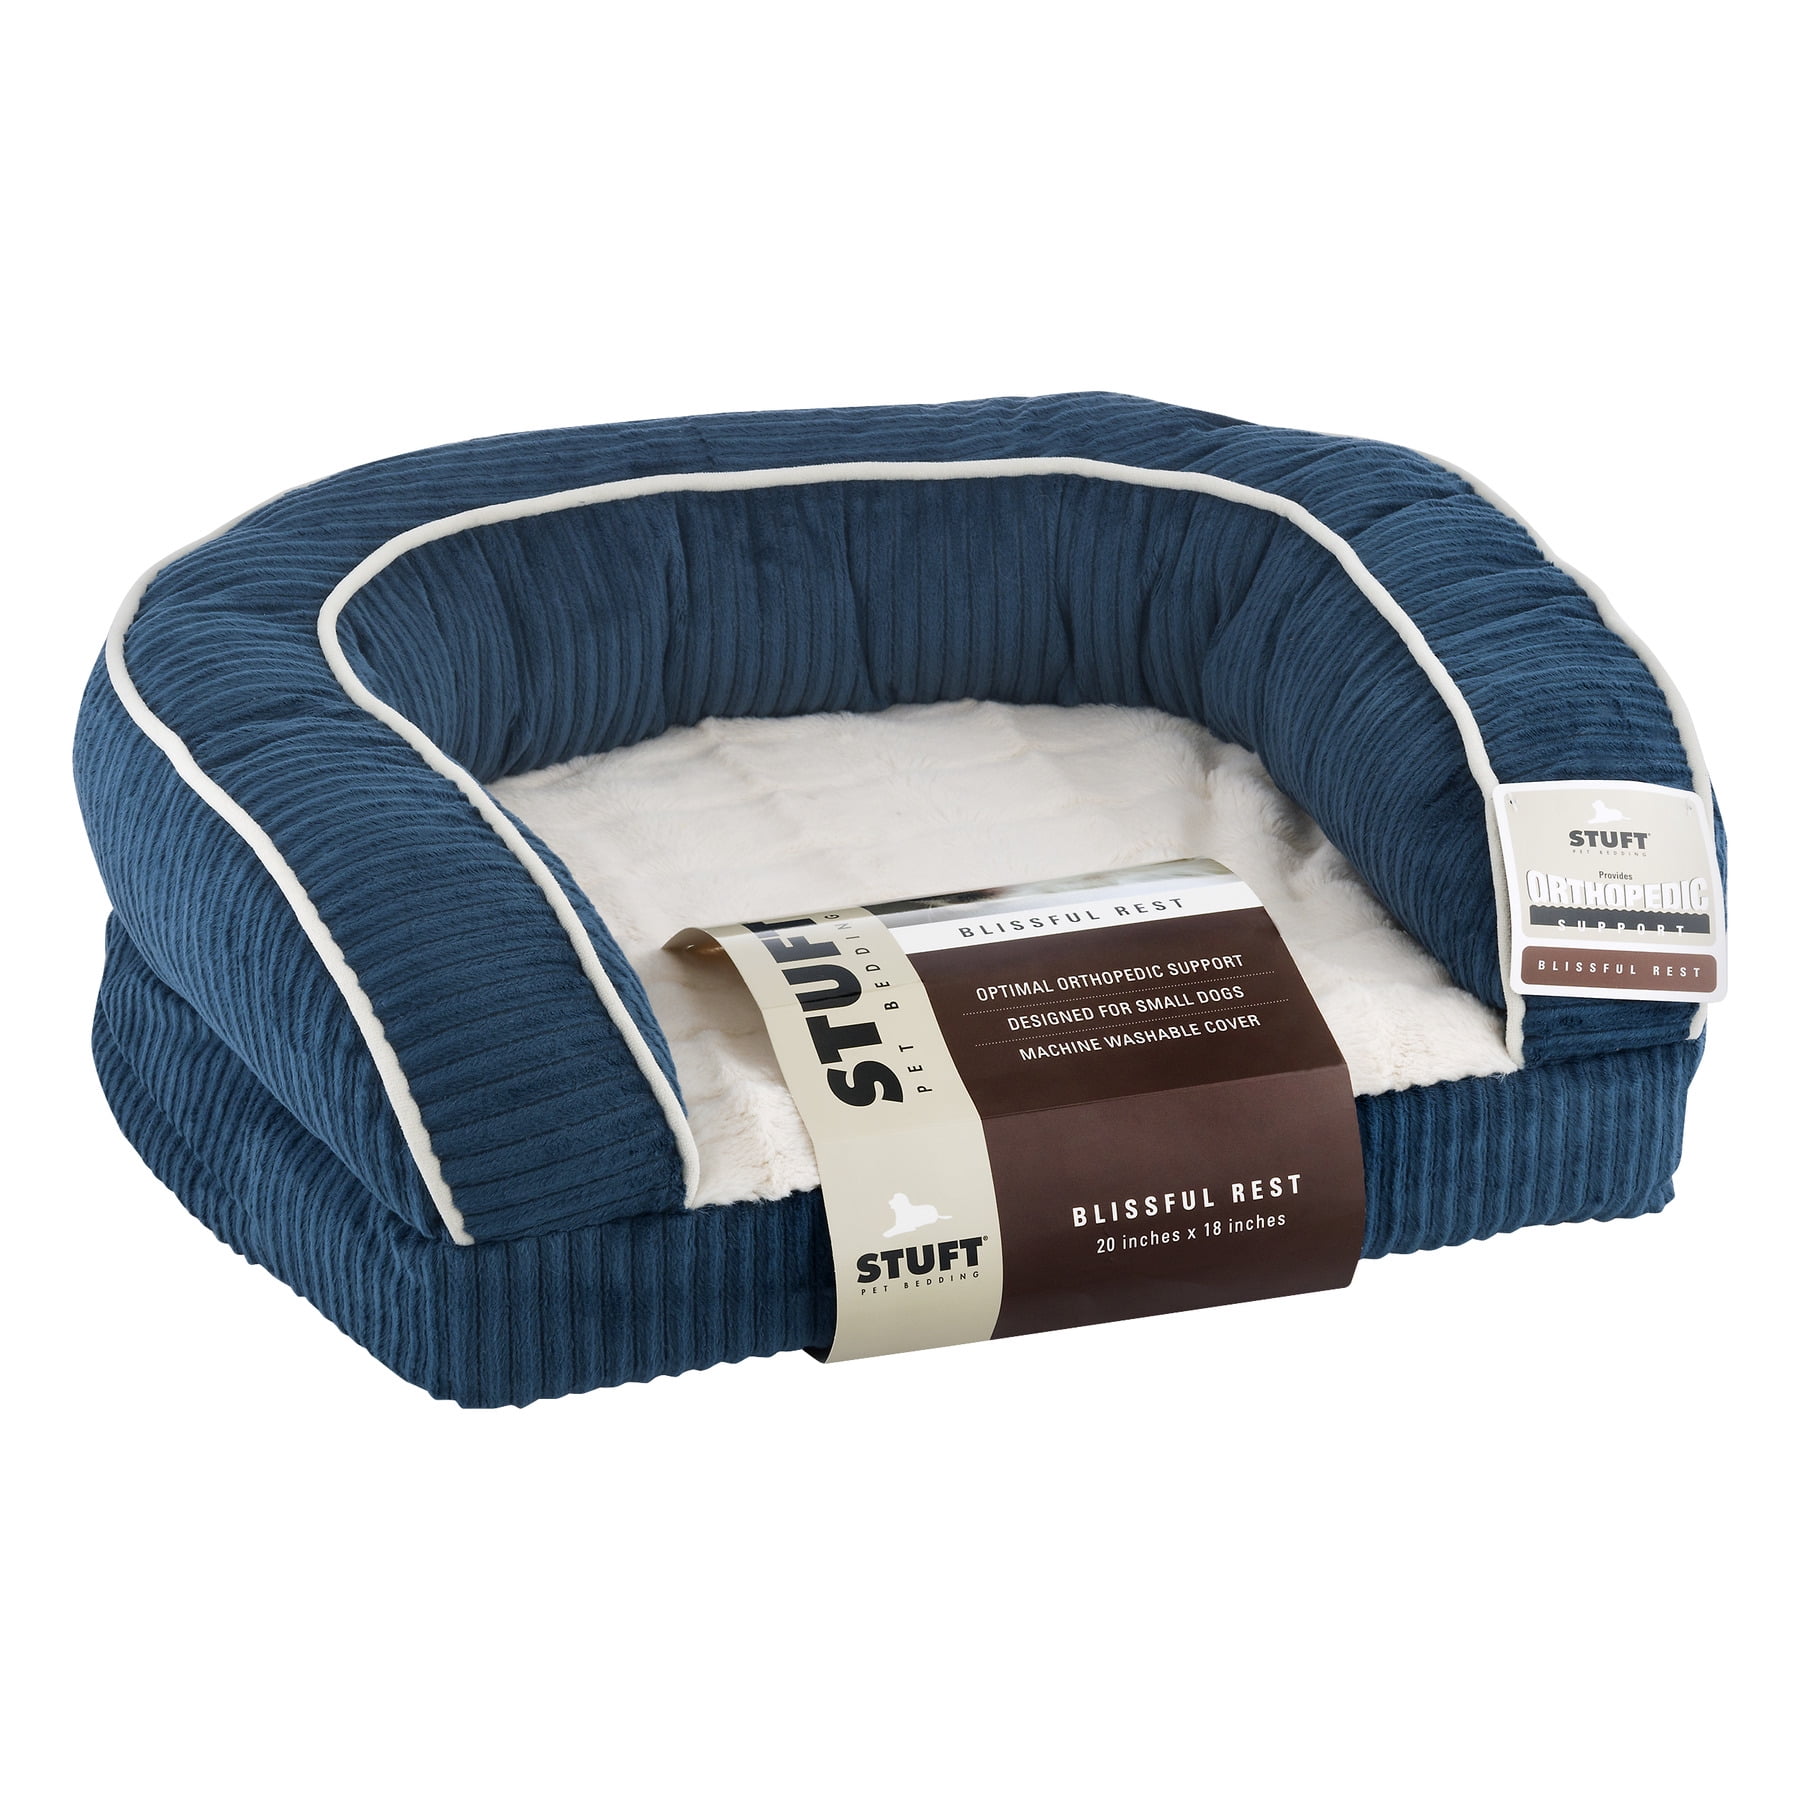 Stuft Blissful Rest Dog Bed, Small 